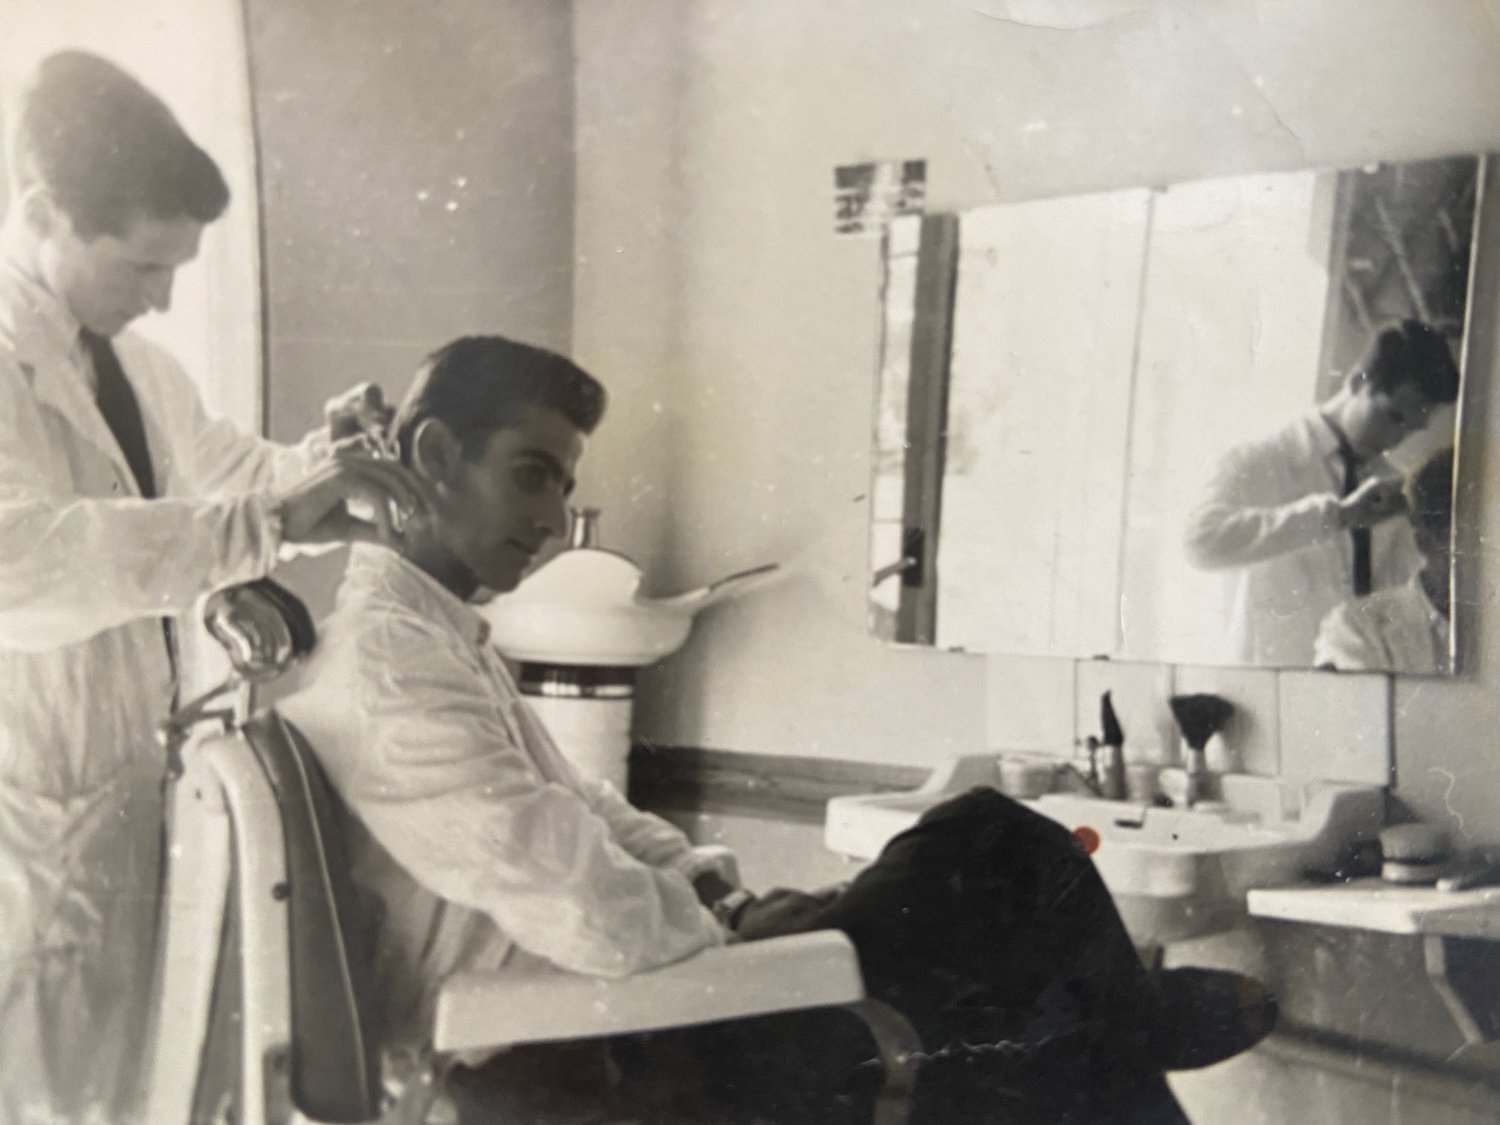 Nick Oricchio, left, working at a barbershop in Italy at age 17